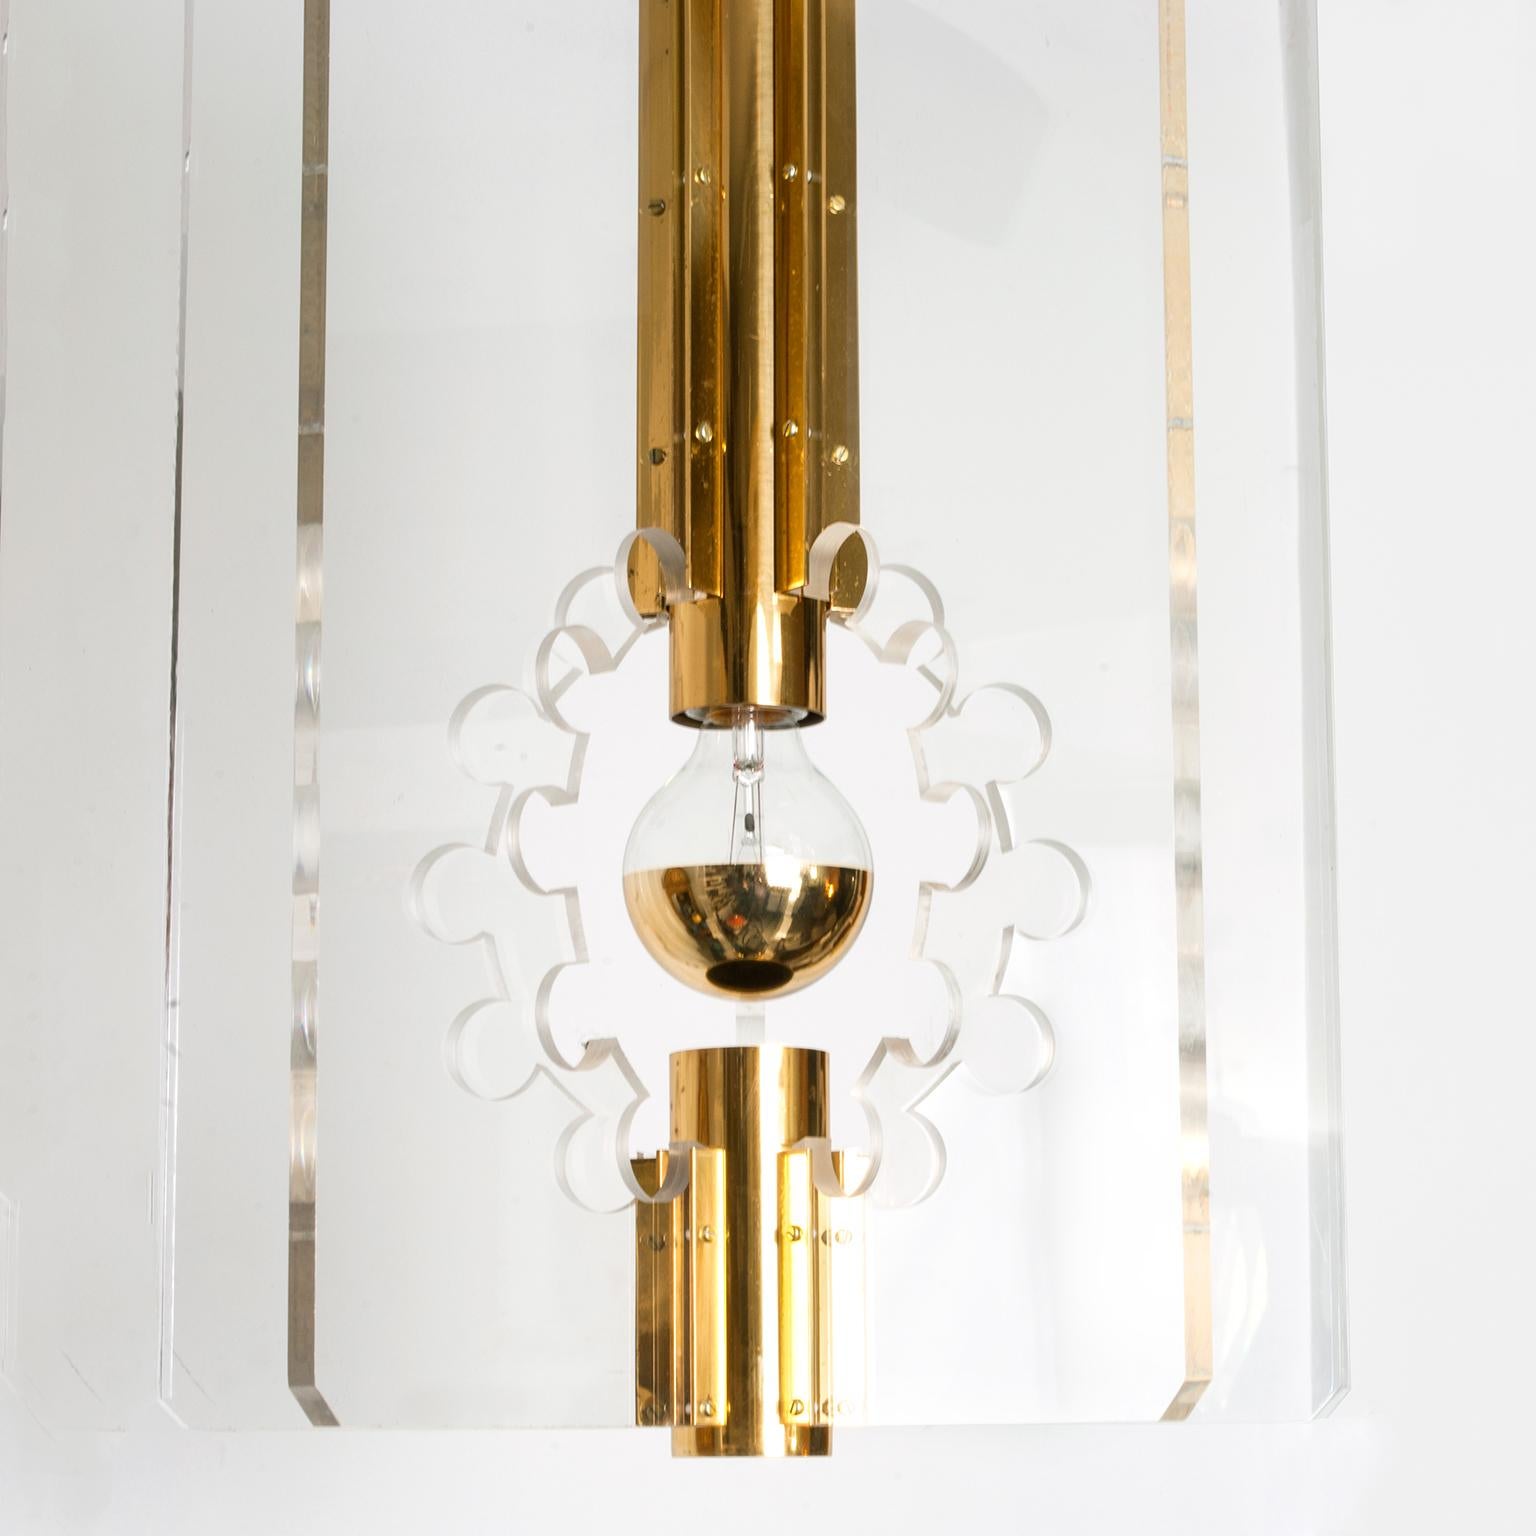 Polished Swedish Lucite and Brass Lantern Pendant by Hans-Agne Jakobsson for Markaryd